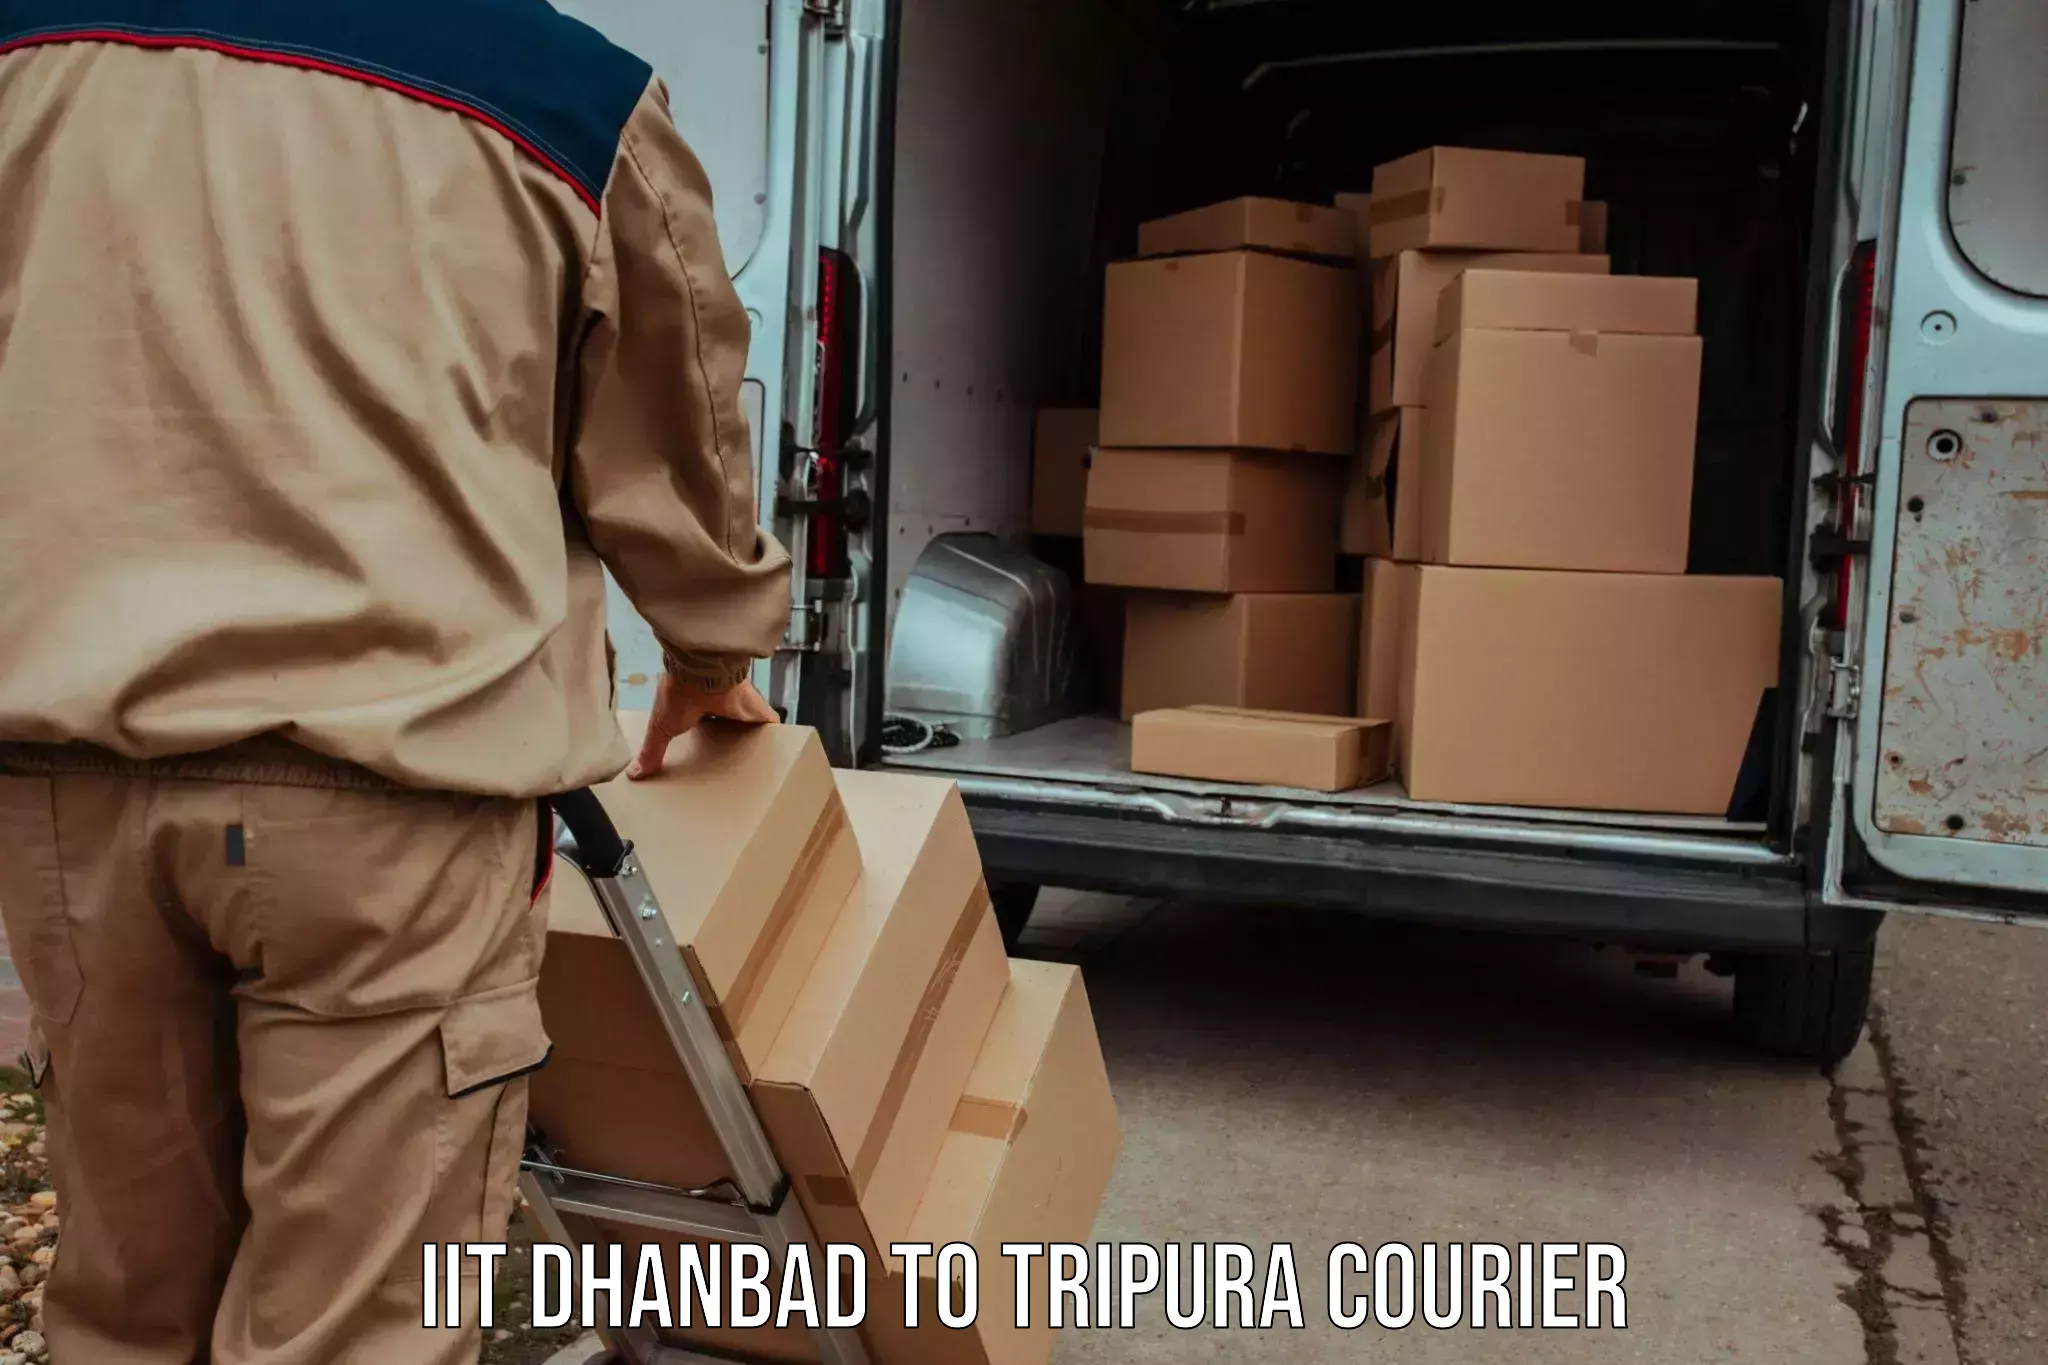 Easy access courier services IIT Dhanbad to Teliamura